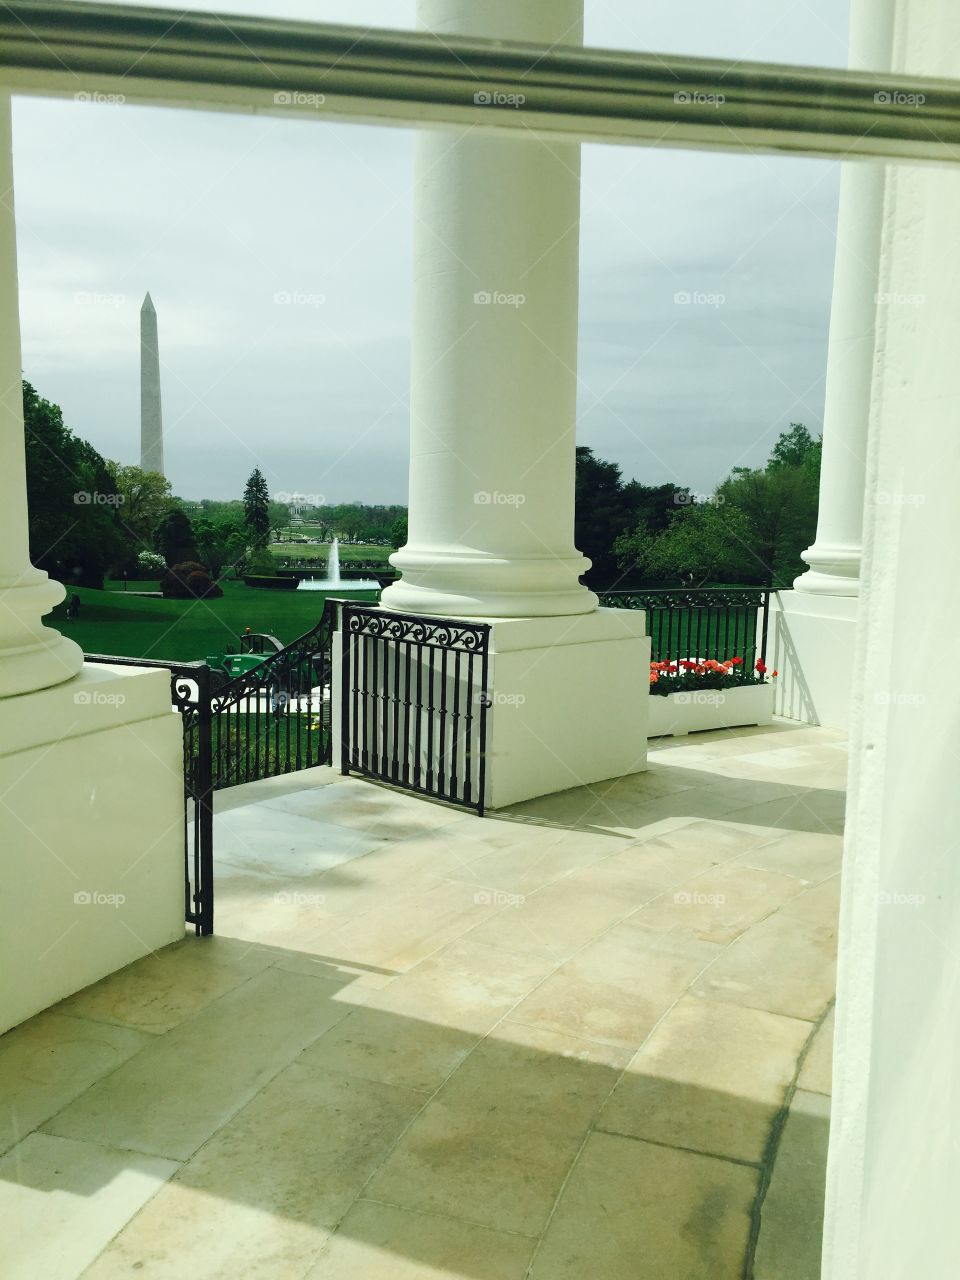 Inside The White House looking at monument